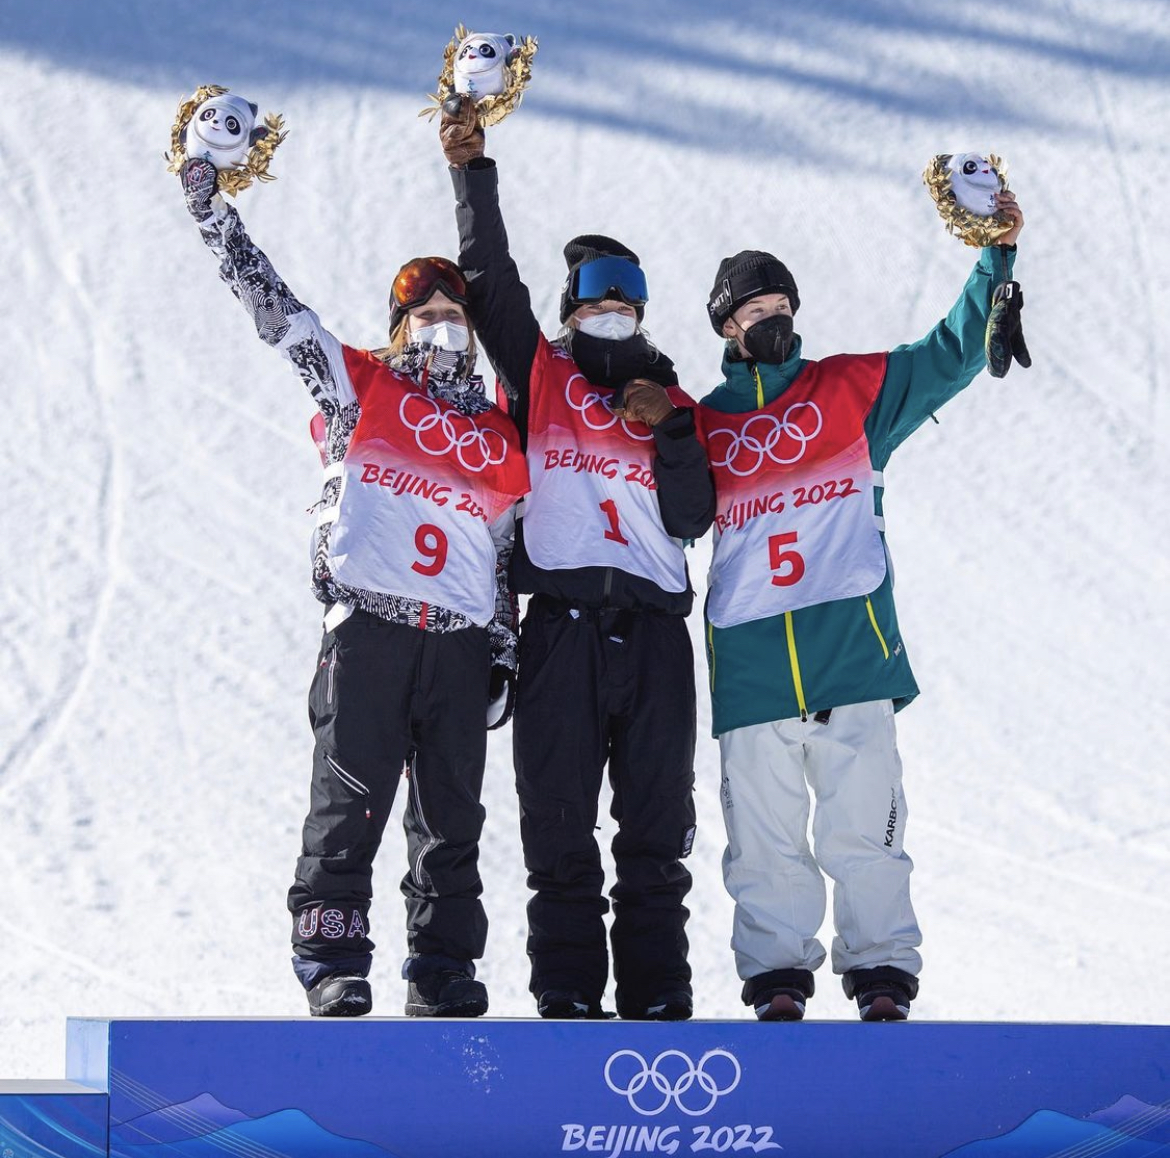 Thredbo basks in bronze glory after Tess Coady's medal win